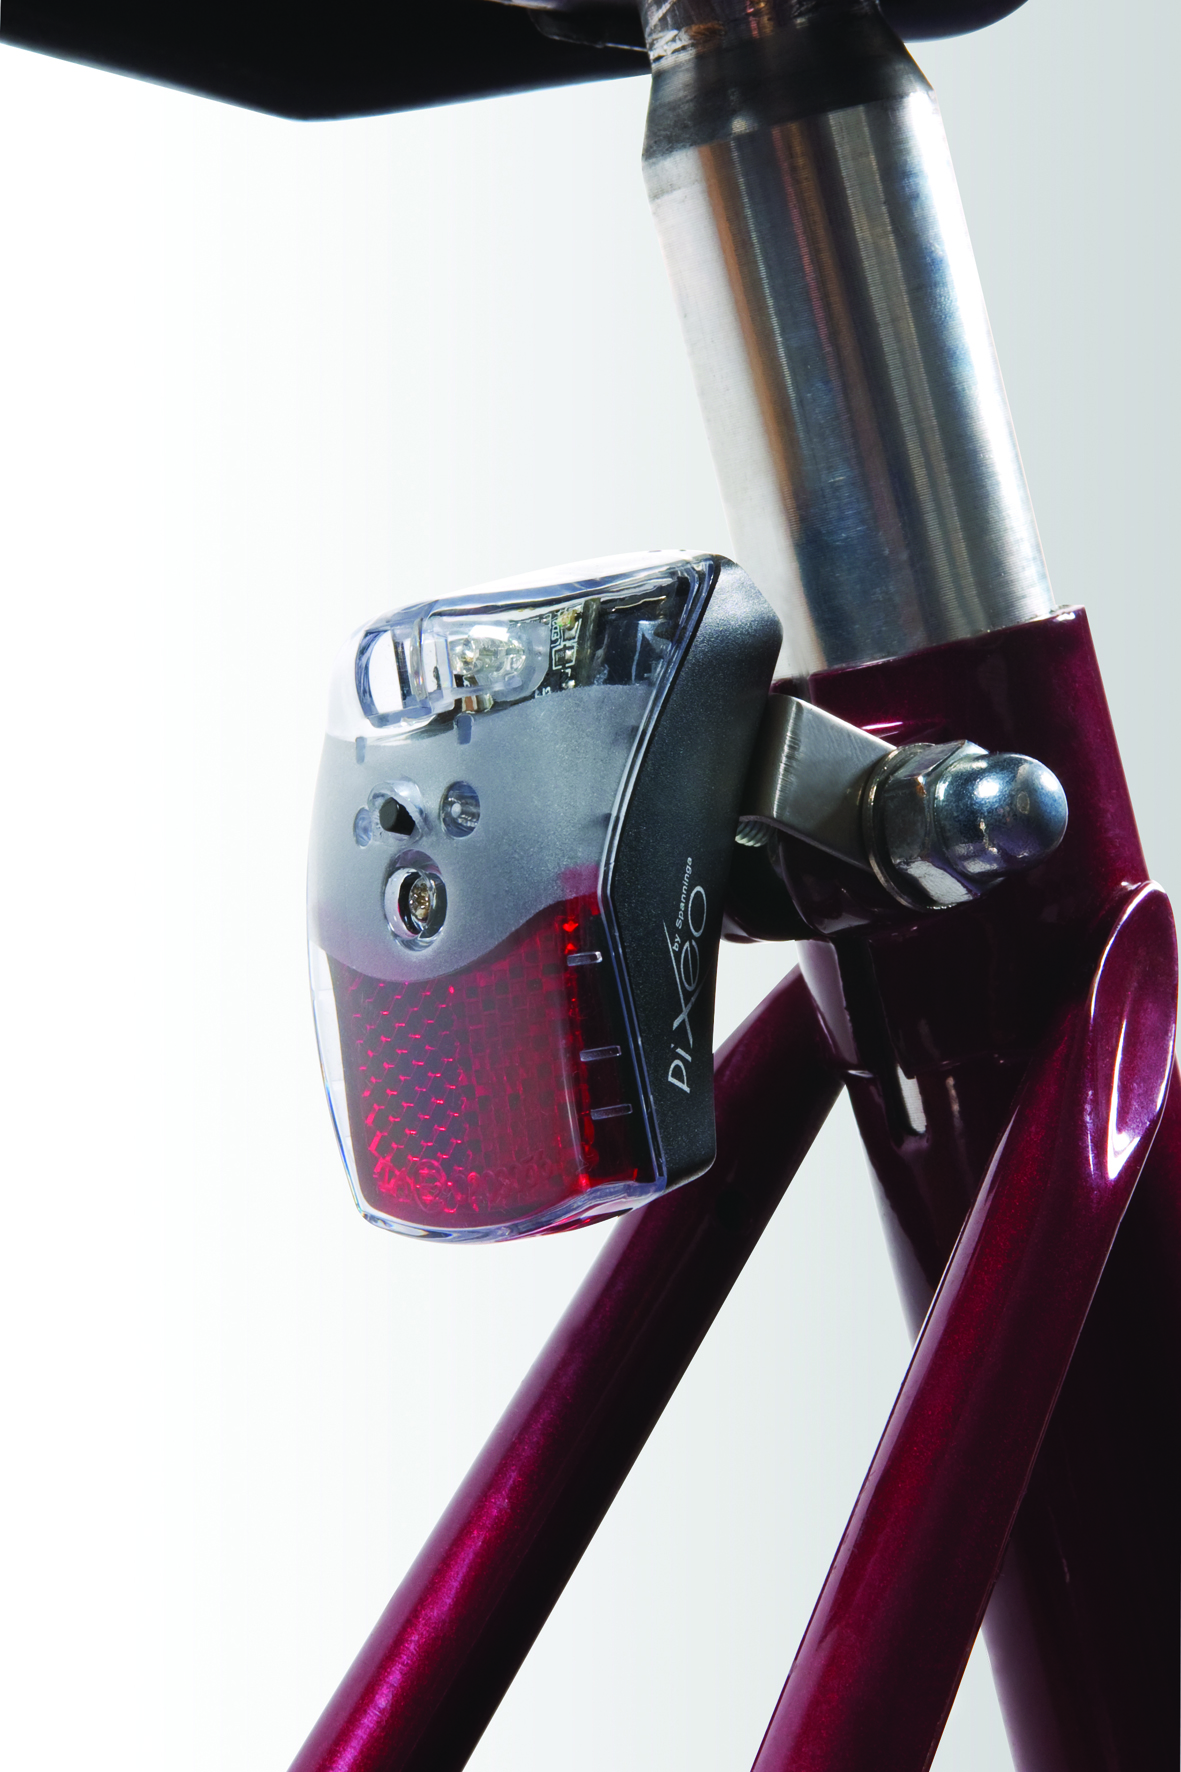 Pixeo rearlight on seat post with Br 02 bracket